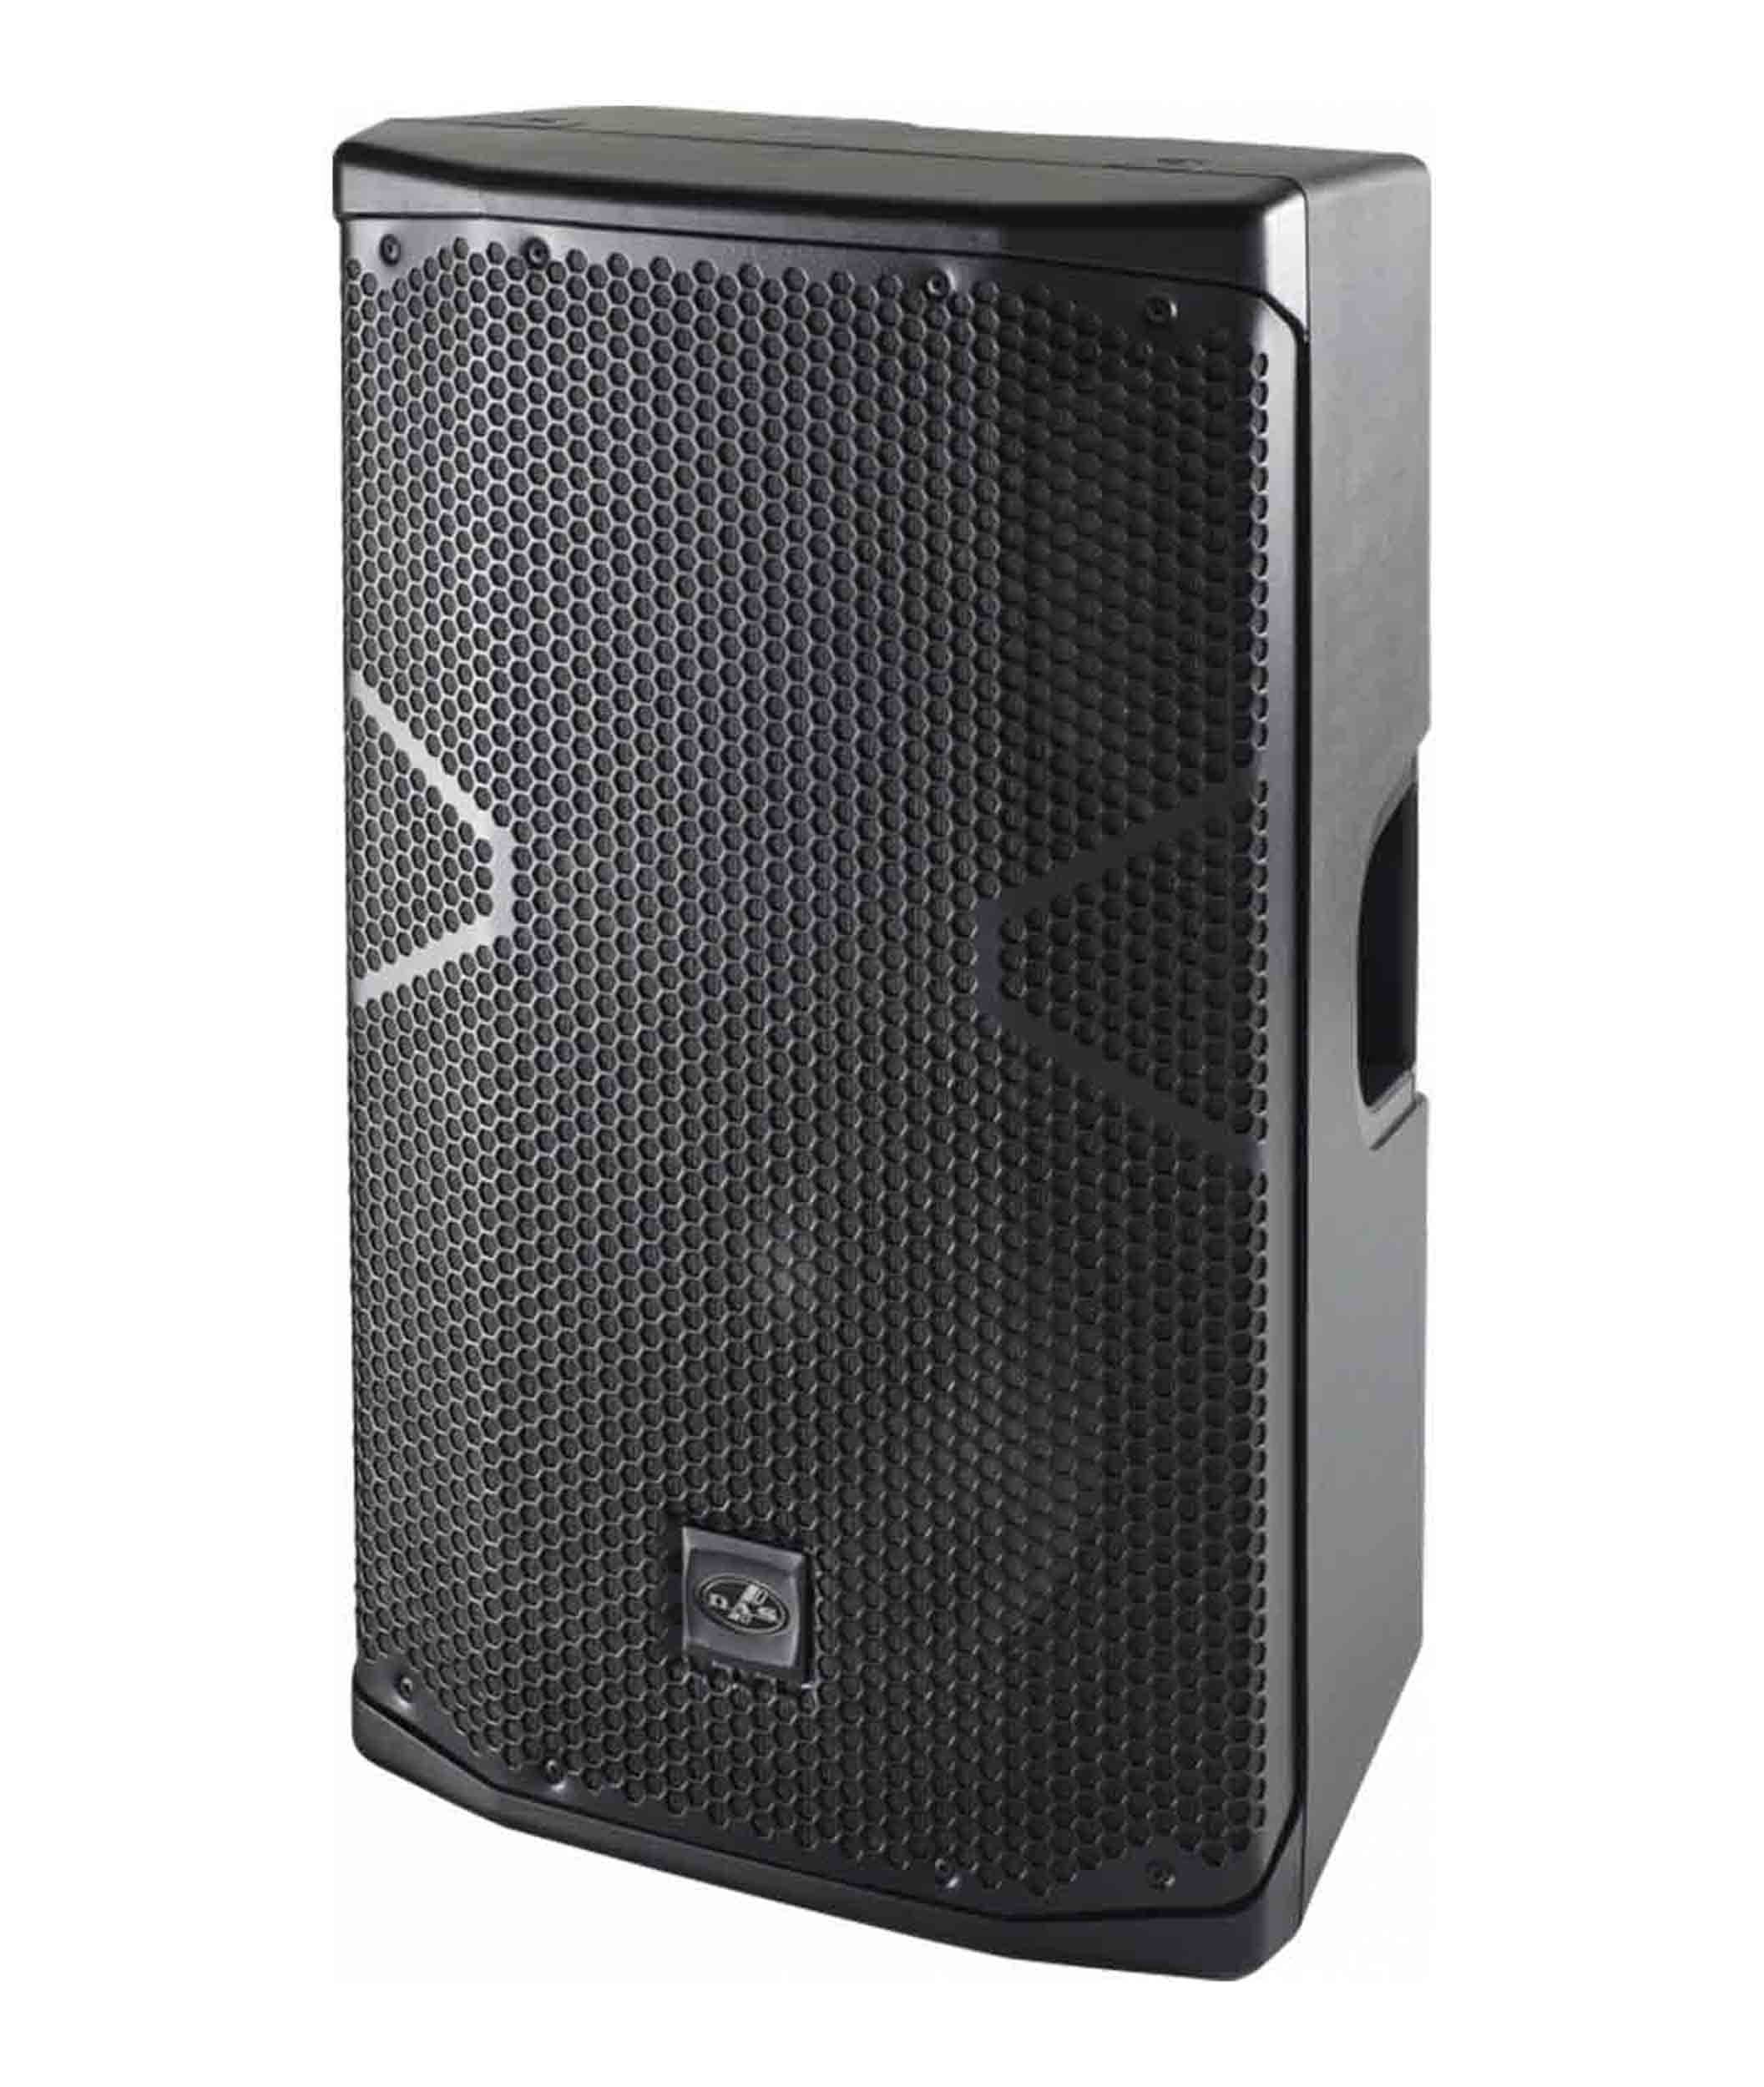 DAS Audio ALTEA-412A 12 Inch 2 Way Powered Portable PA System Speakers - Black by DAS Audio